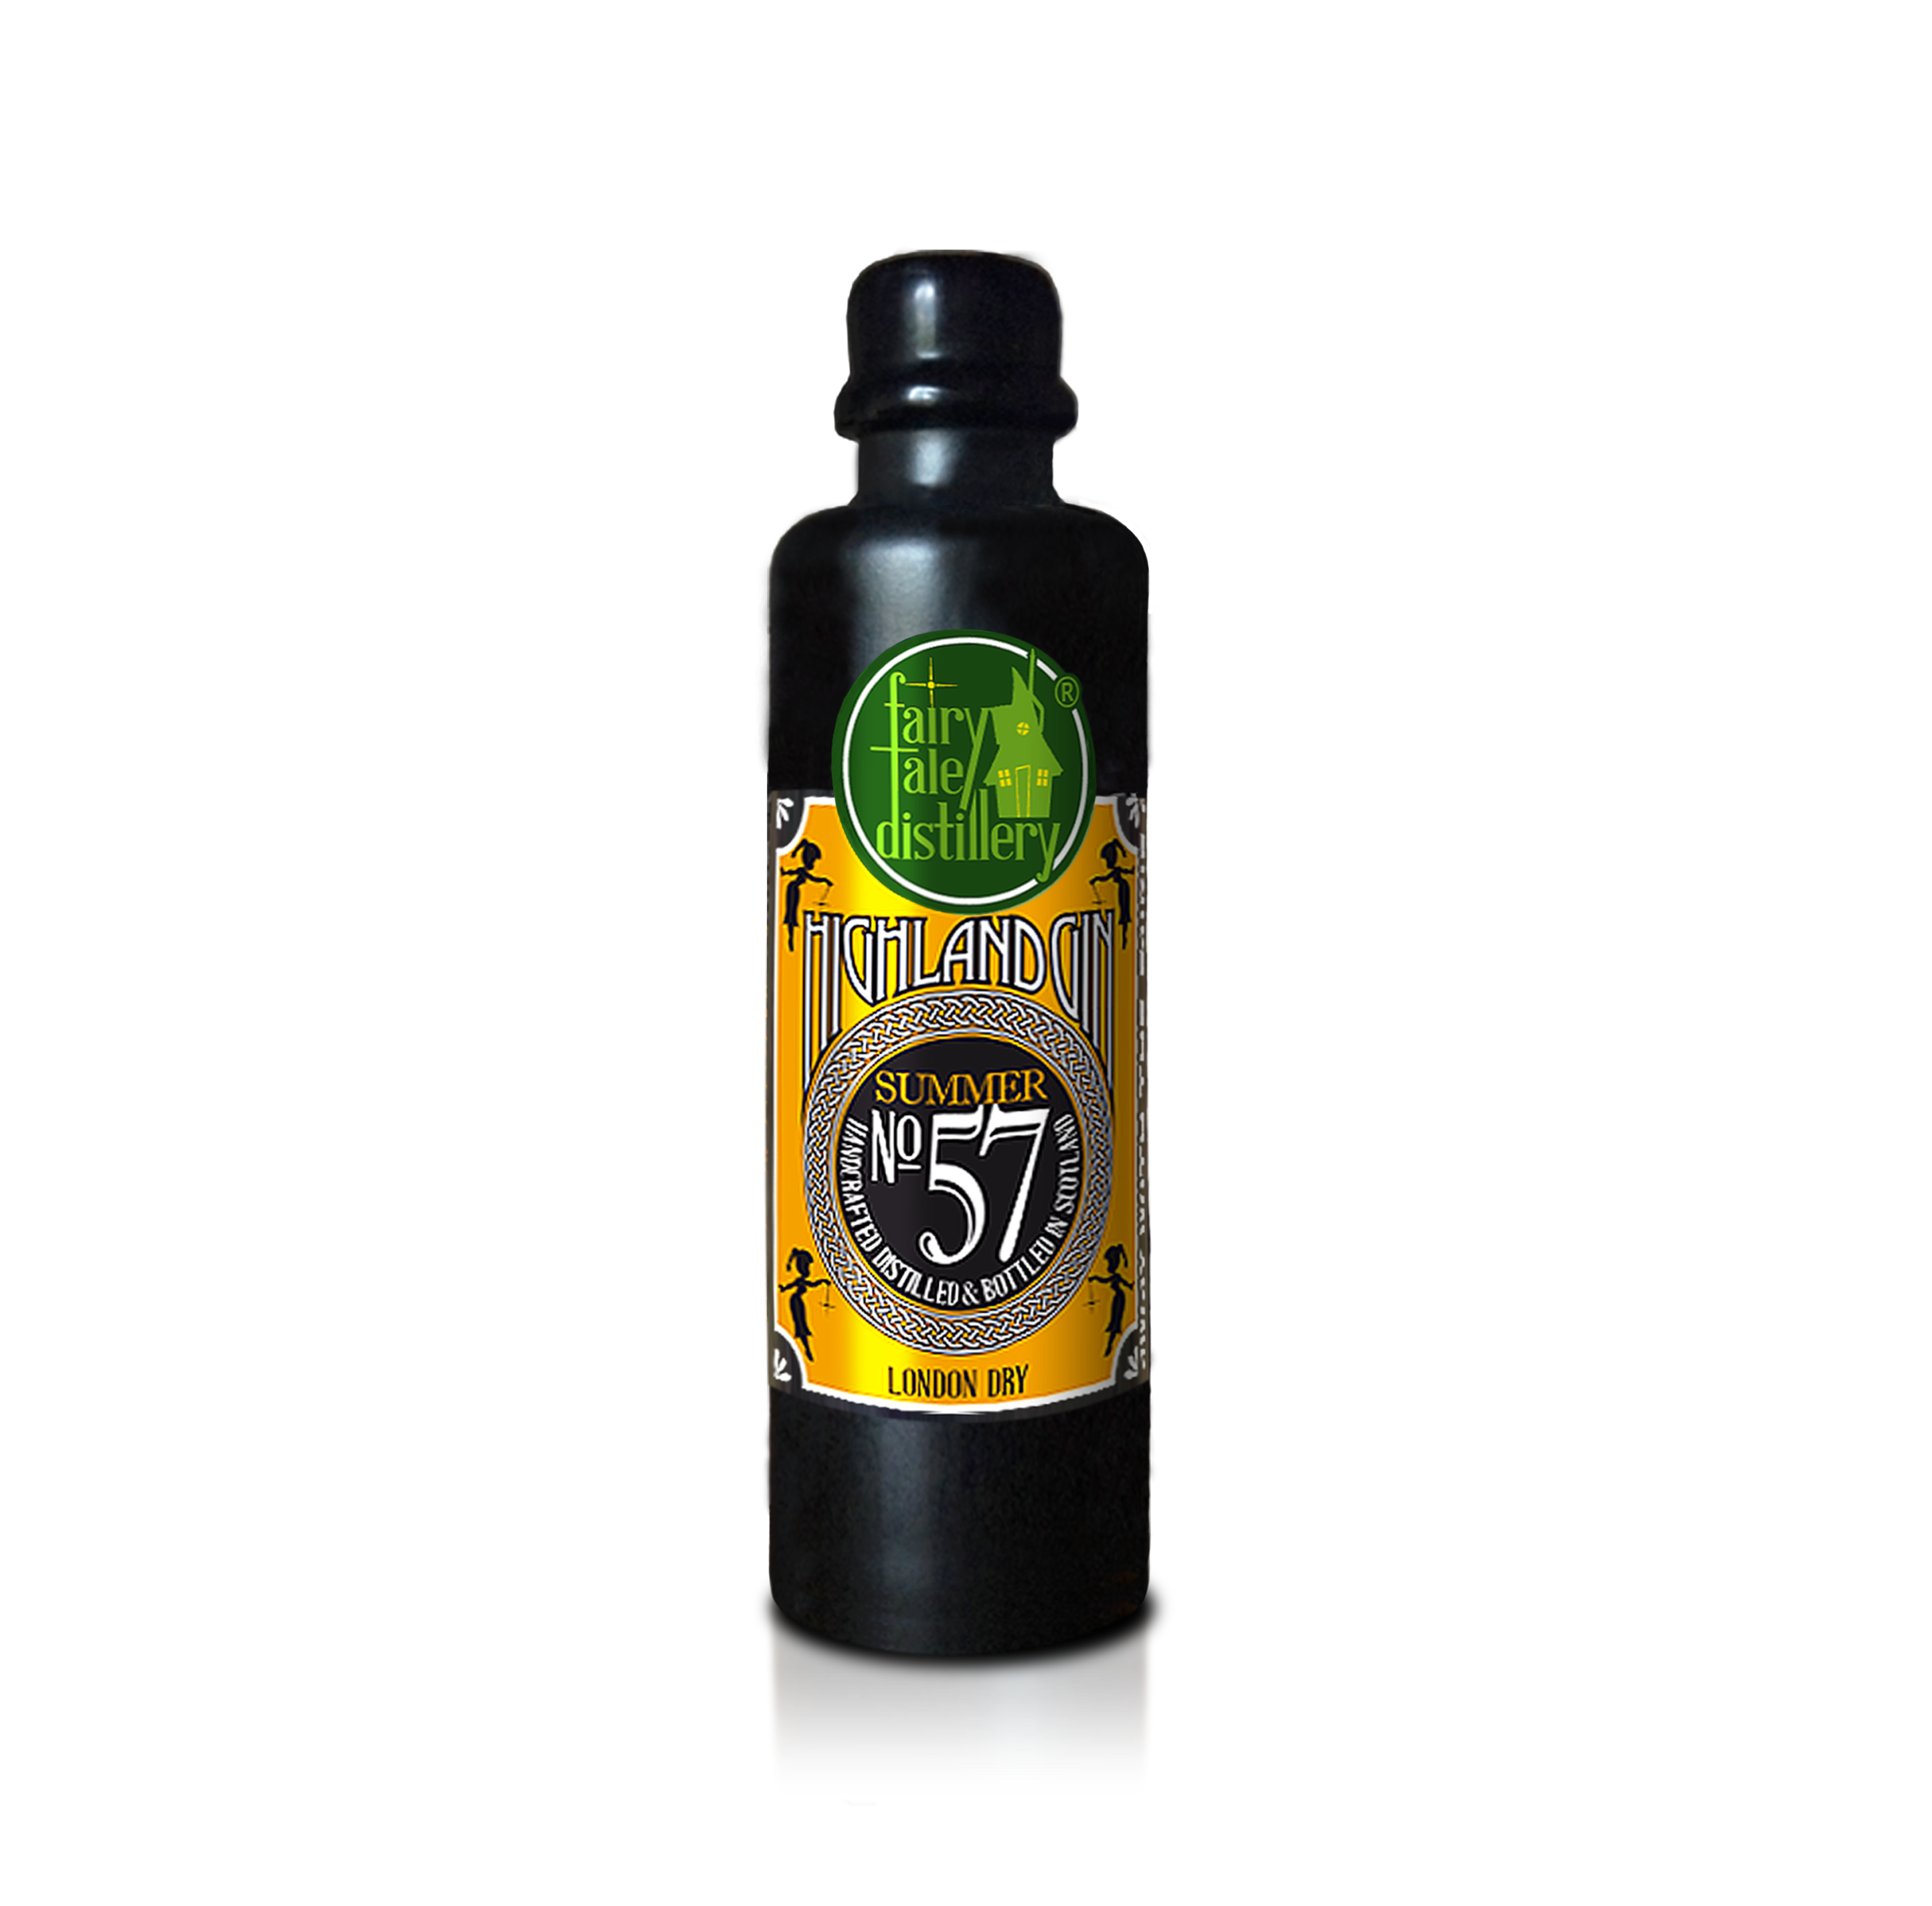 No 57 Summer London Dry Highland Gin bottle 0,2l from Fairytale Distillery